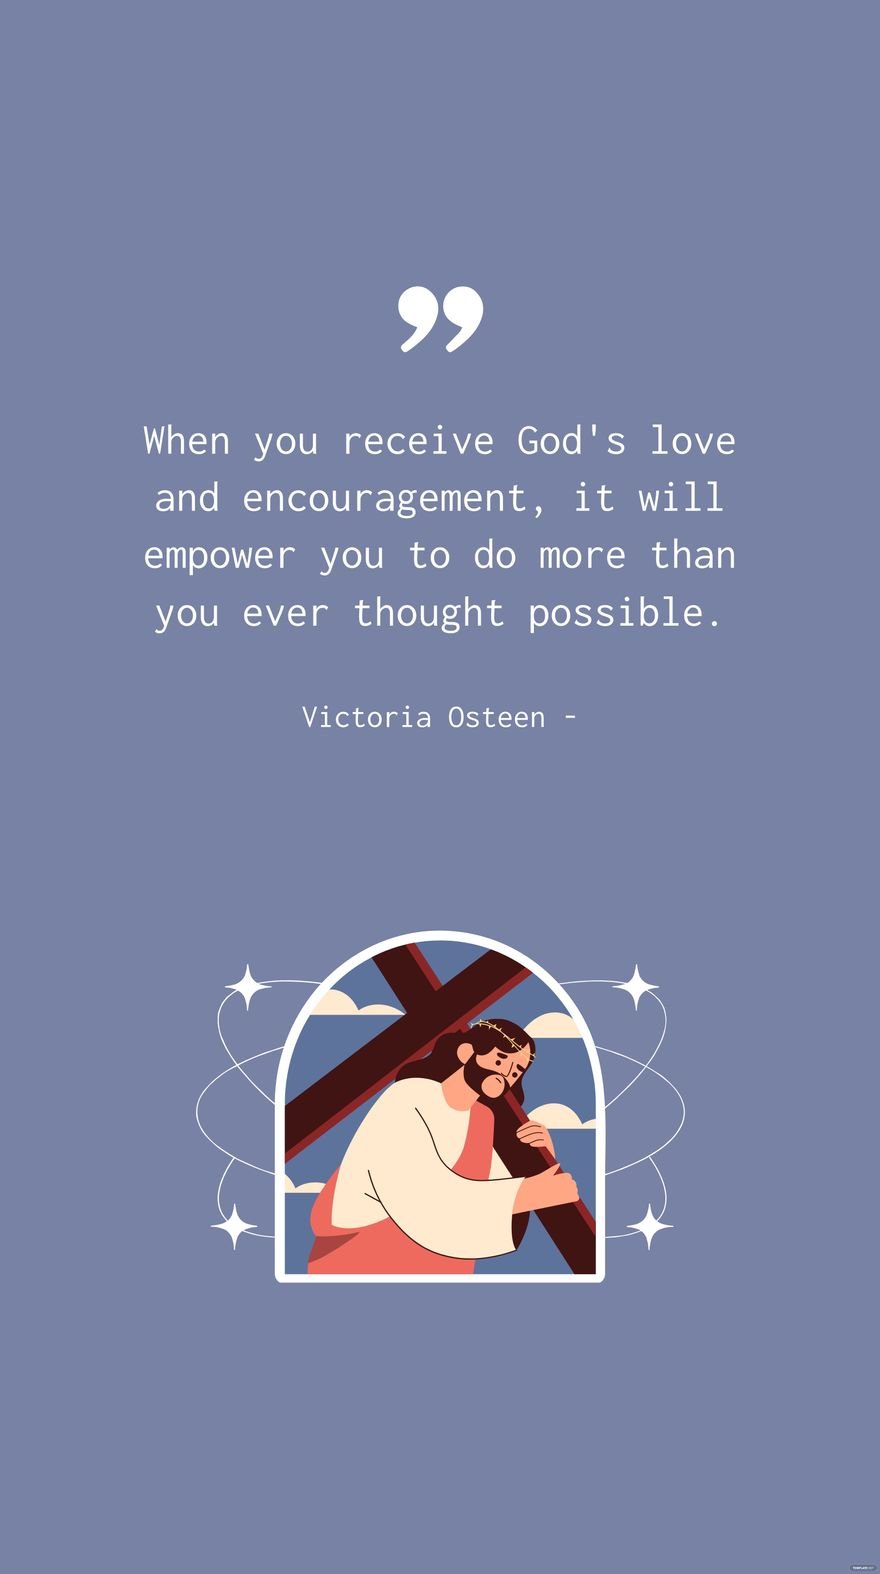 Victoria Osteen - When you receive God's love and encouragement, it will empower you to do more than you ever thought possible.